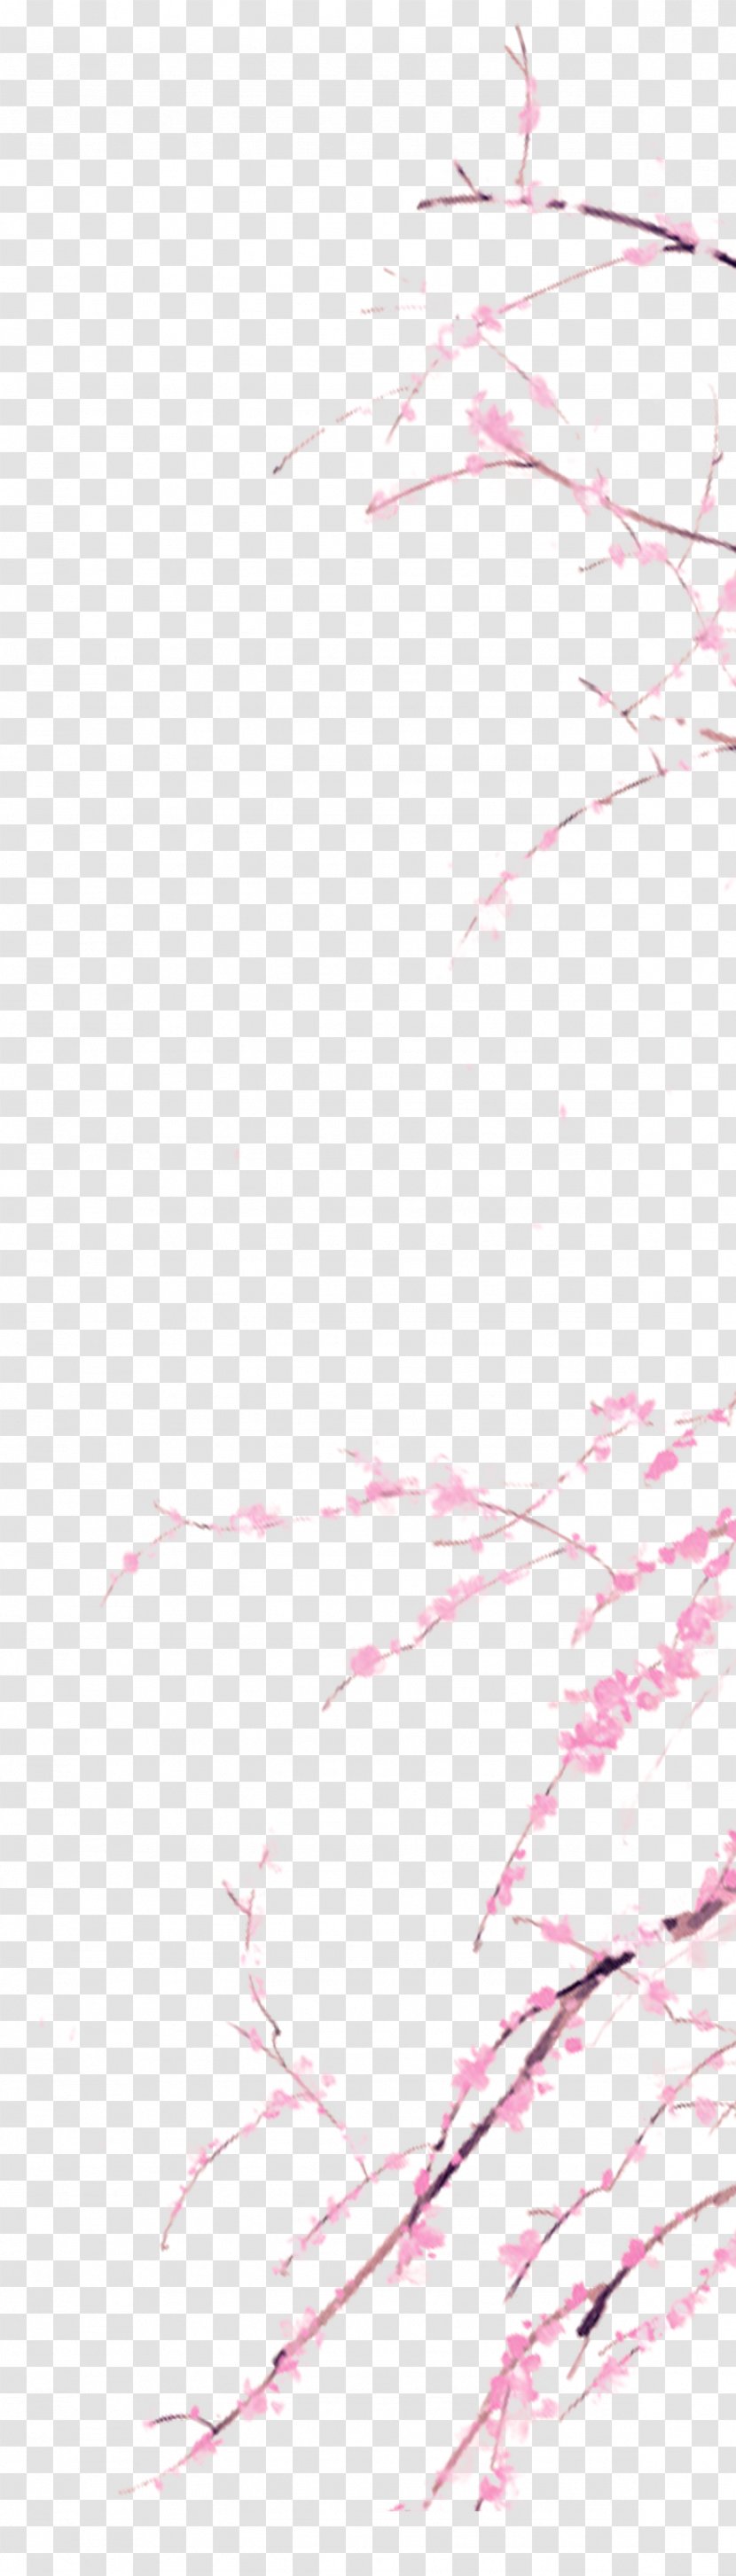 Watercolor Painting Pink - Flower - Peach Branches Decorative Patterns Transparent PNG